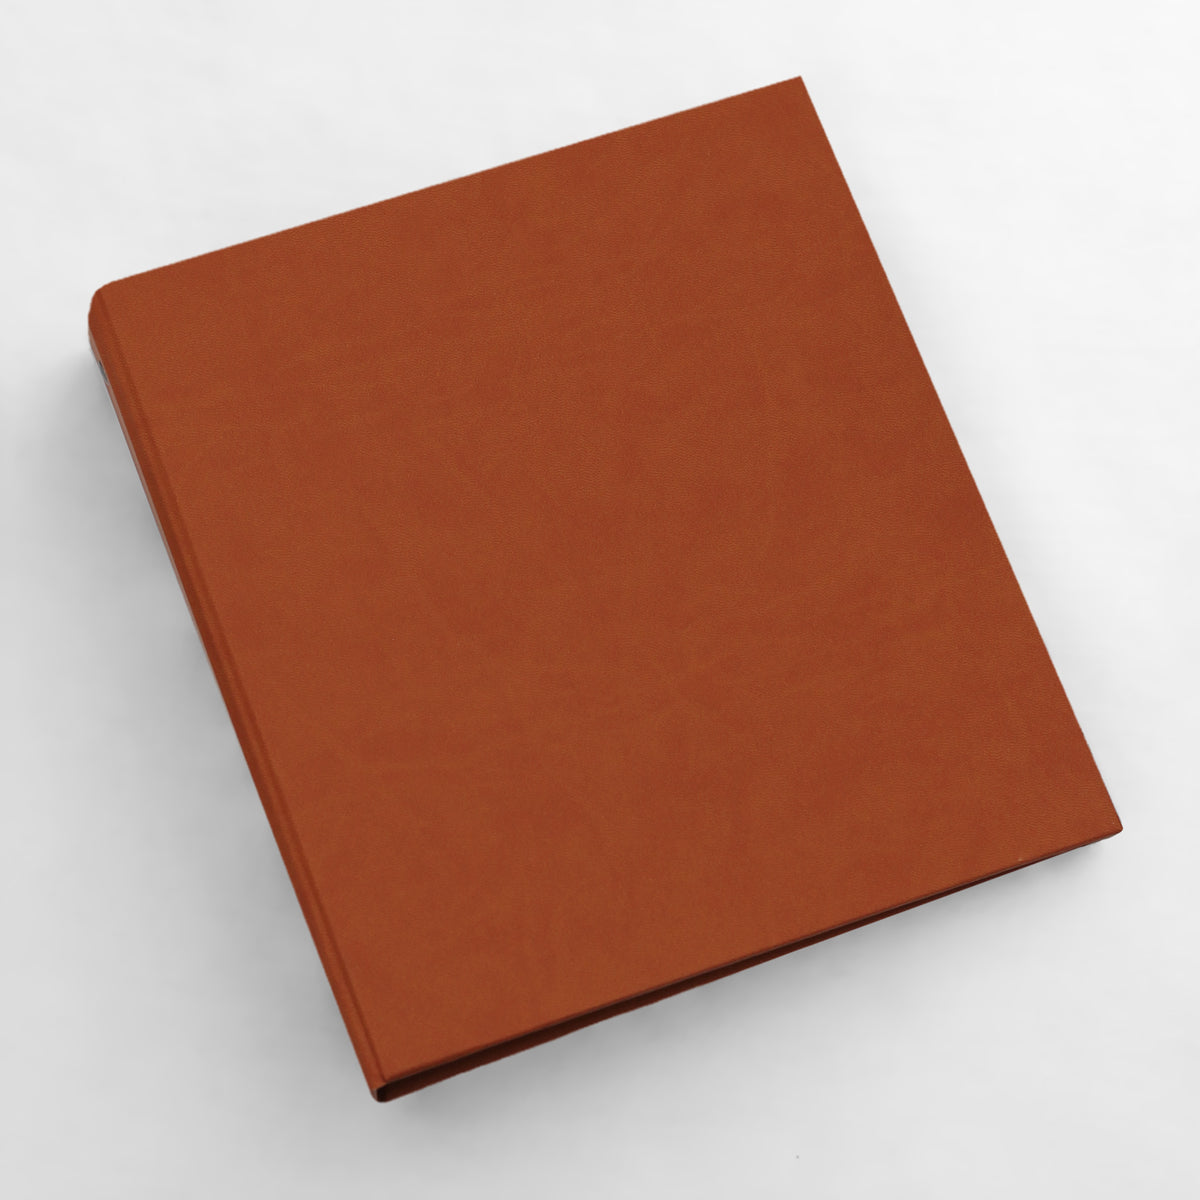 Photo Binder (for 5x7 photos) with Terra Cotta Animal Friendly Faux Leather